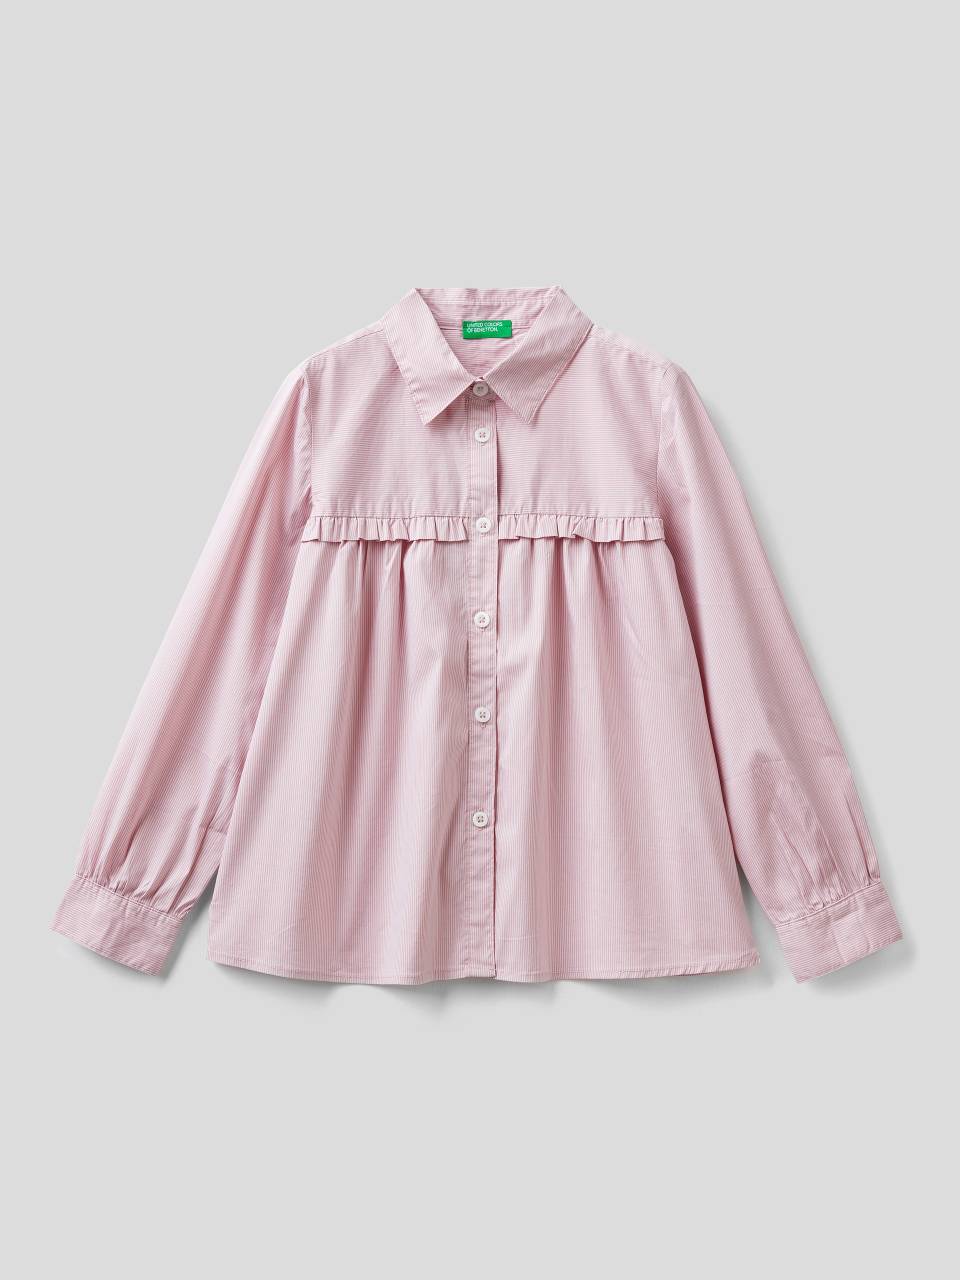 Benetton Shirt with rouches on the yoke. 1